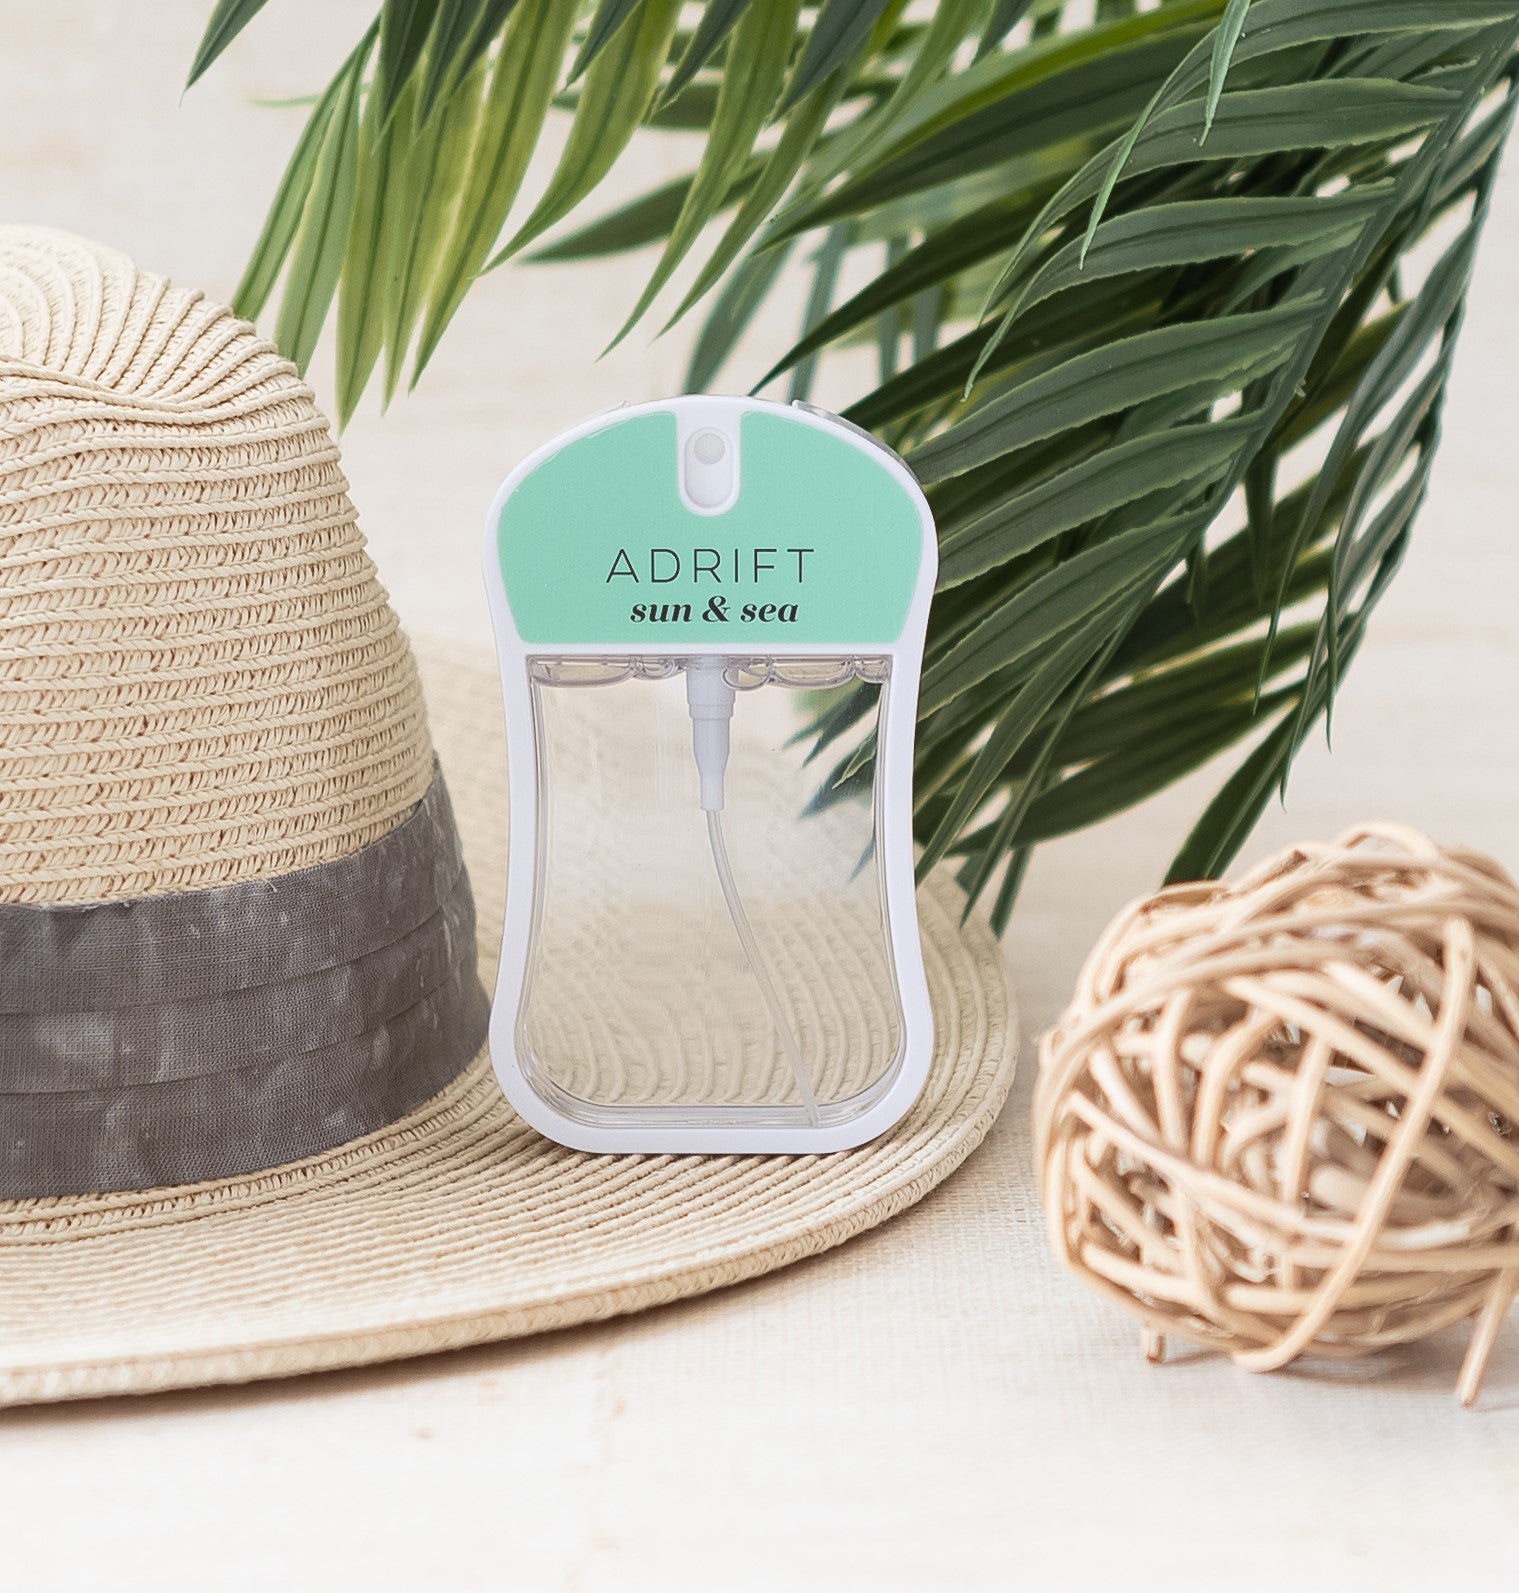 Adrift (Sun & Sea) moisturizing body mist spray bottle with light green color and clear liquid in a rounded rectangle shape. Spray bottle has 1.1 fl ox or 35 mL. spray bottle is on straw hat with palm tree in background. 